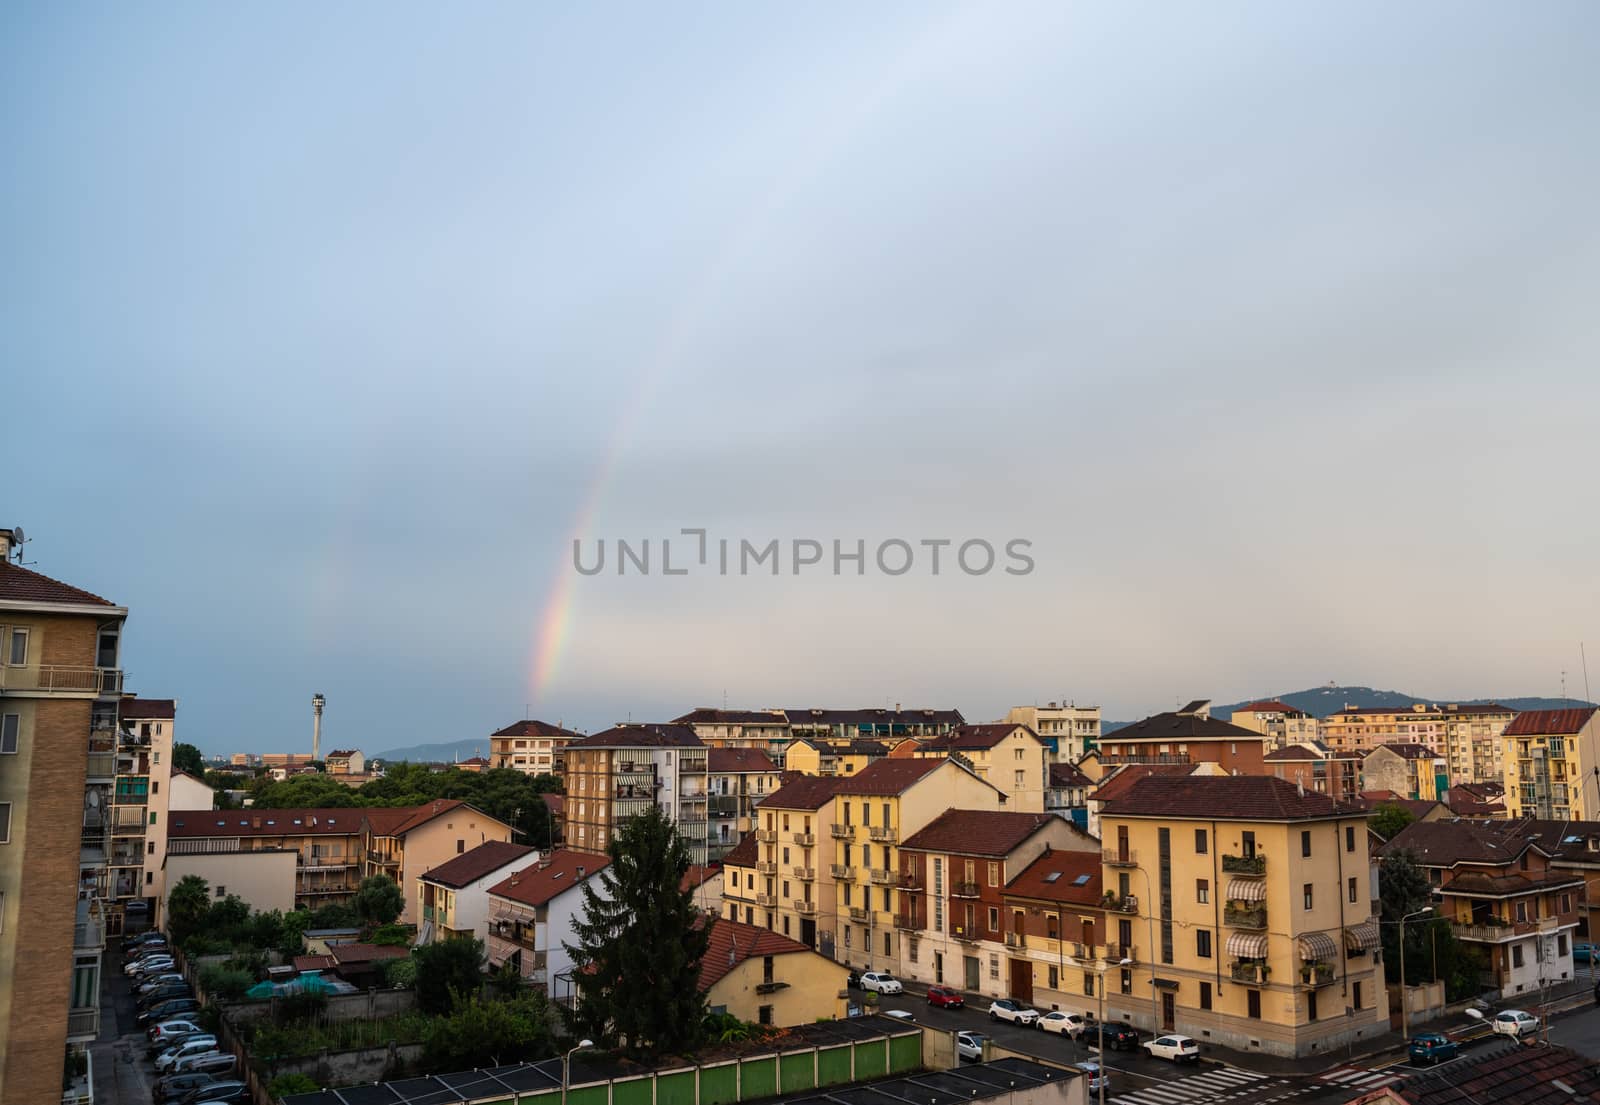 Turin, Piedmont, Italy. June 2020. After a summer storm in the northern suburbs, a rainbow emerges from the roof of a small house on the horizon and embraces the city.